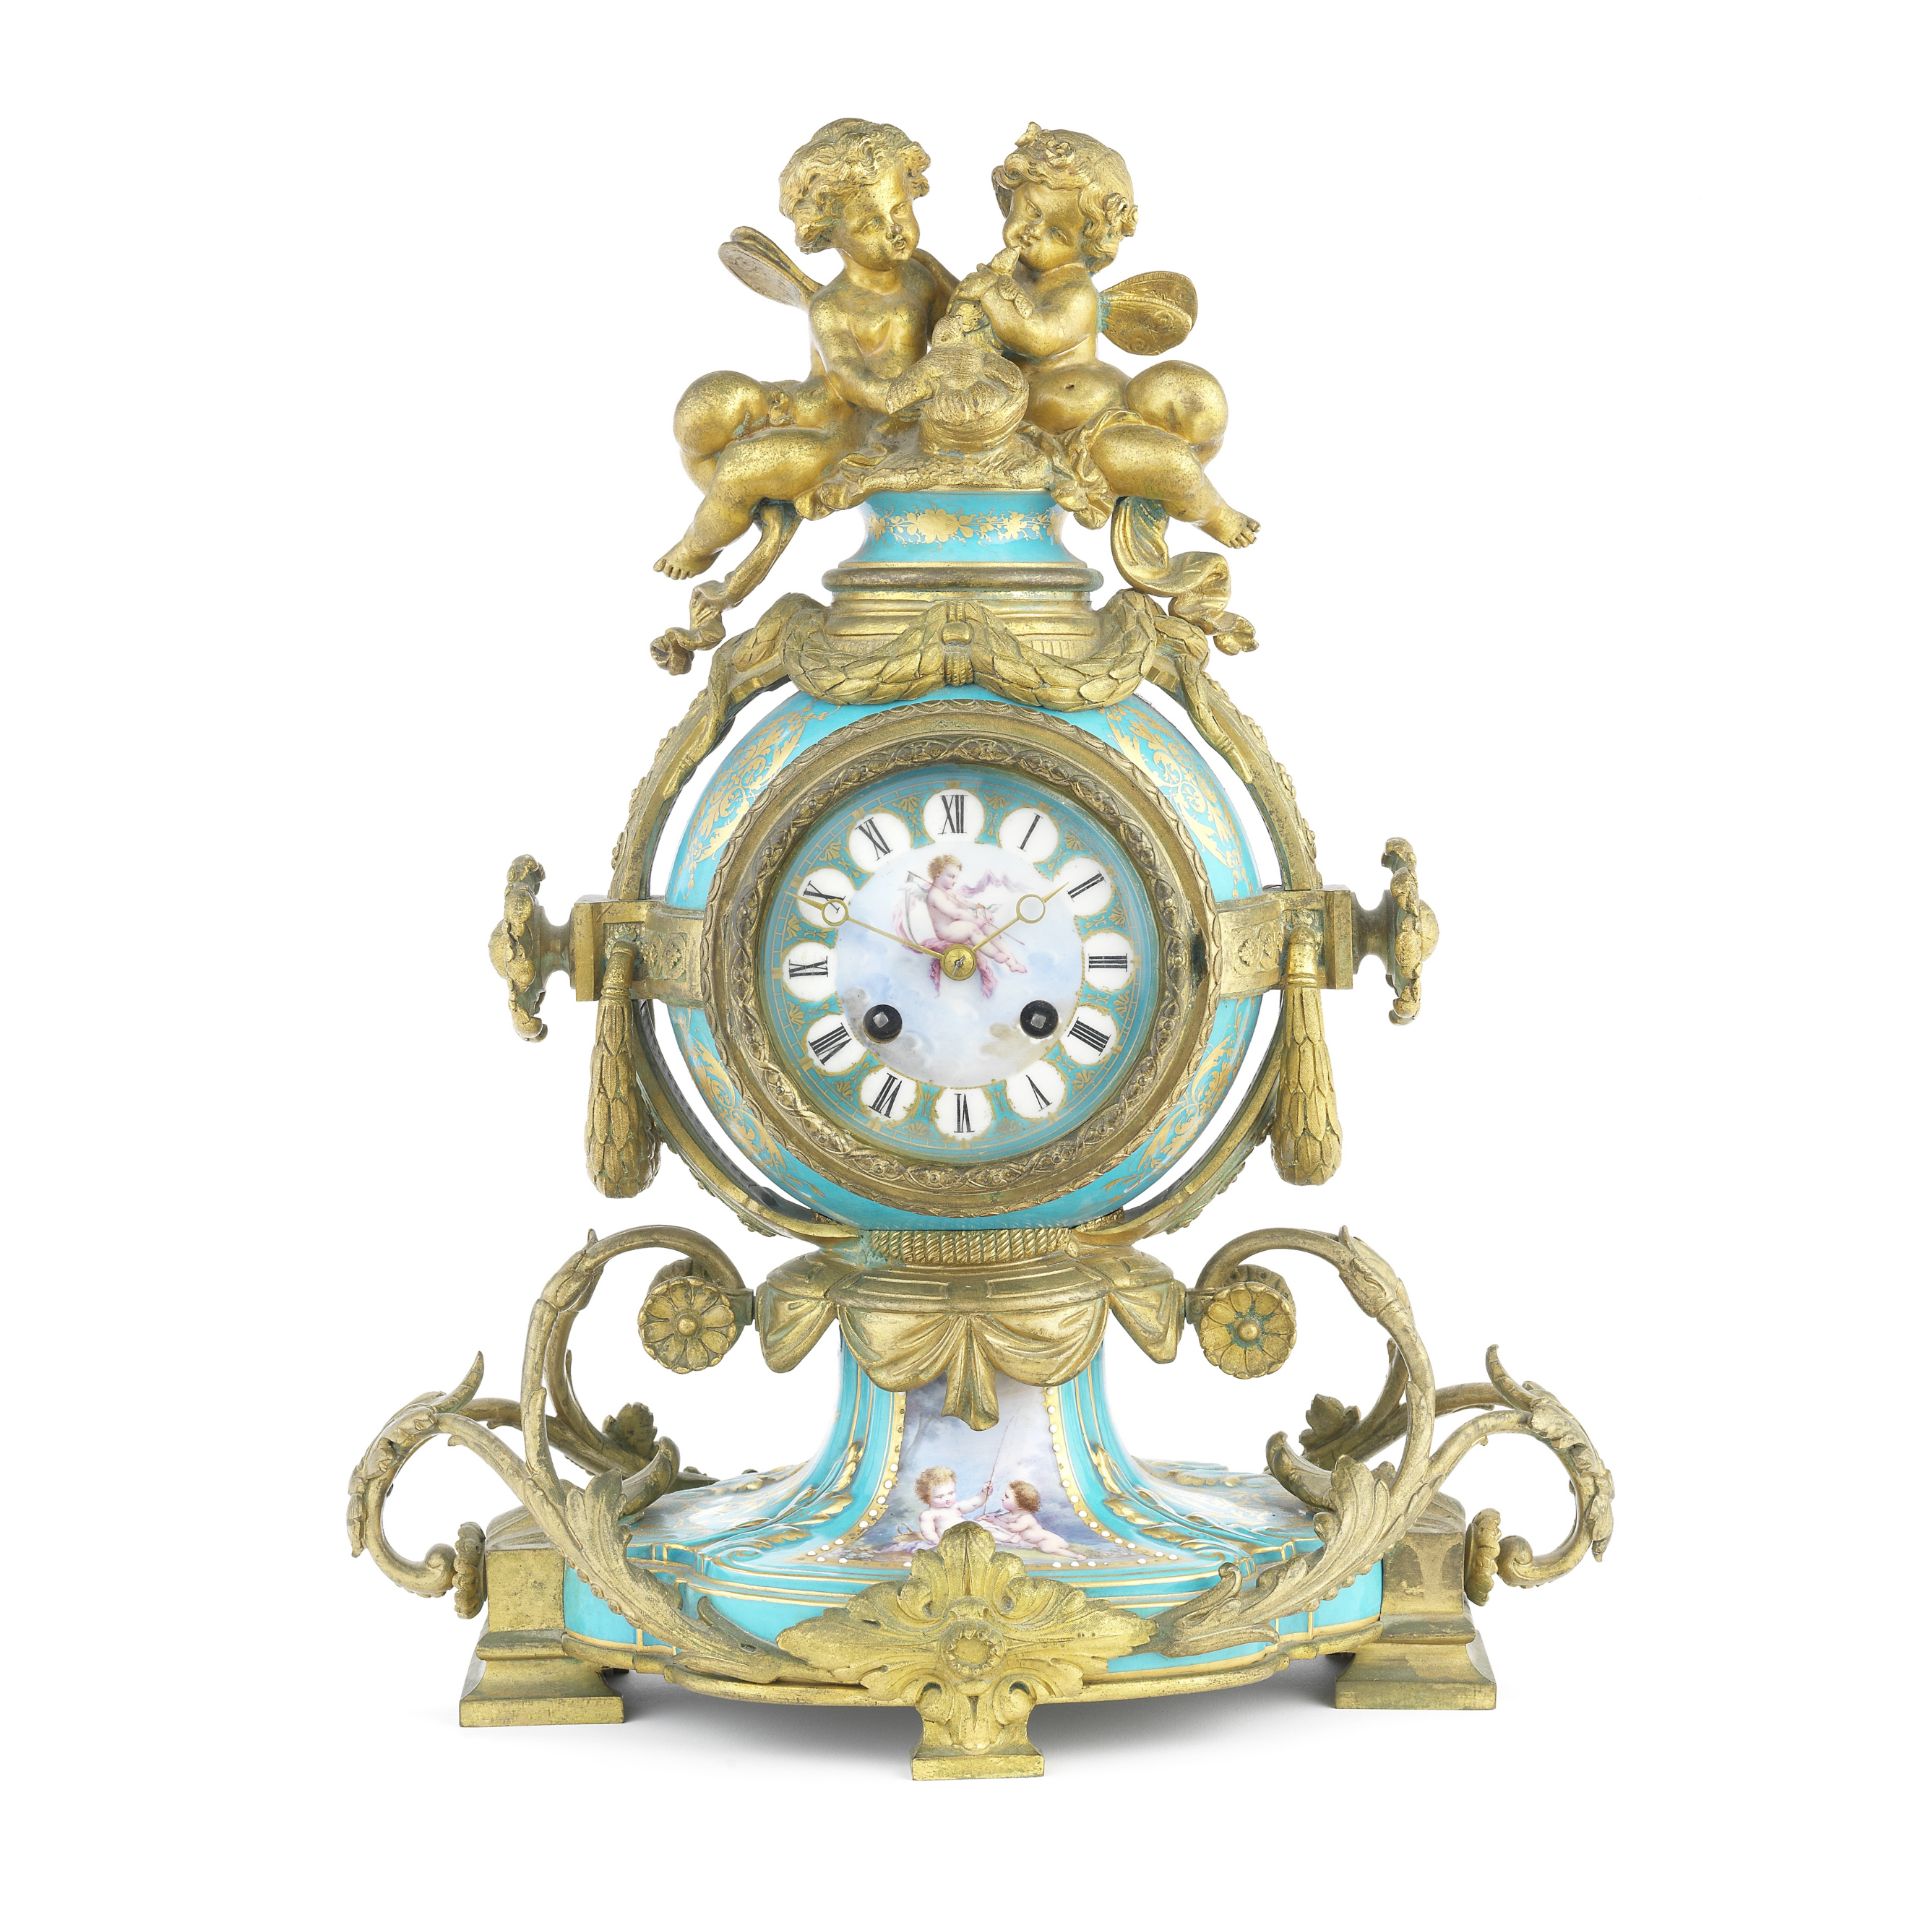 A late 19th century French gilt bronze mounted S&#232;vres-style porcelain figural mantel clock ...